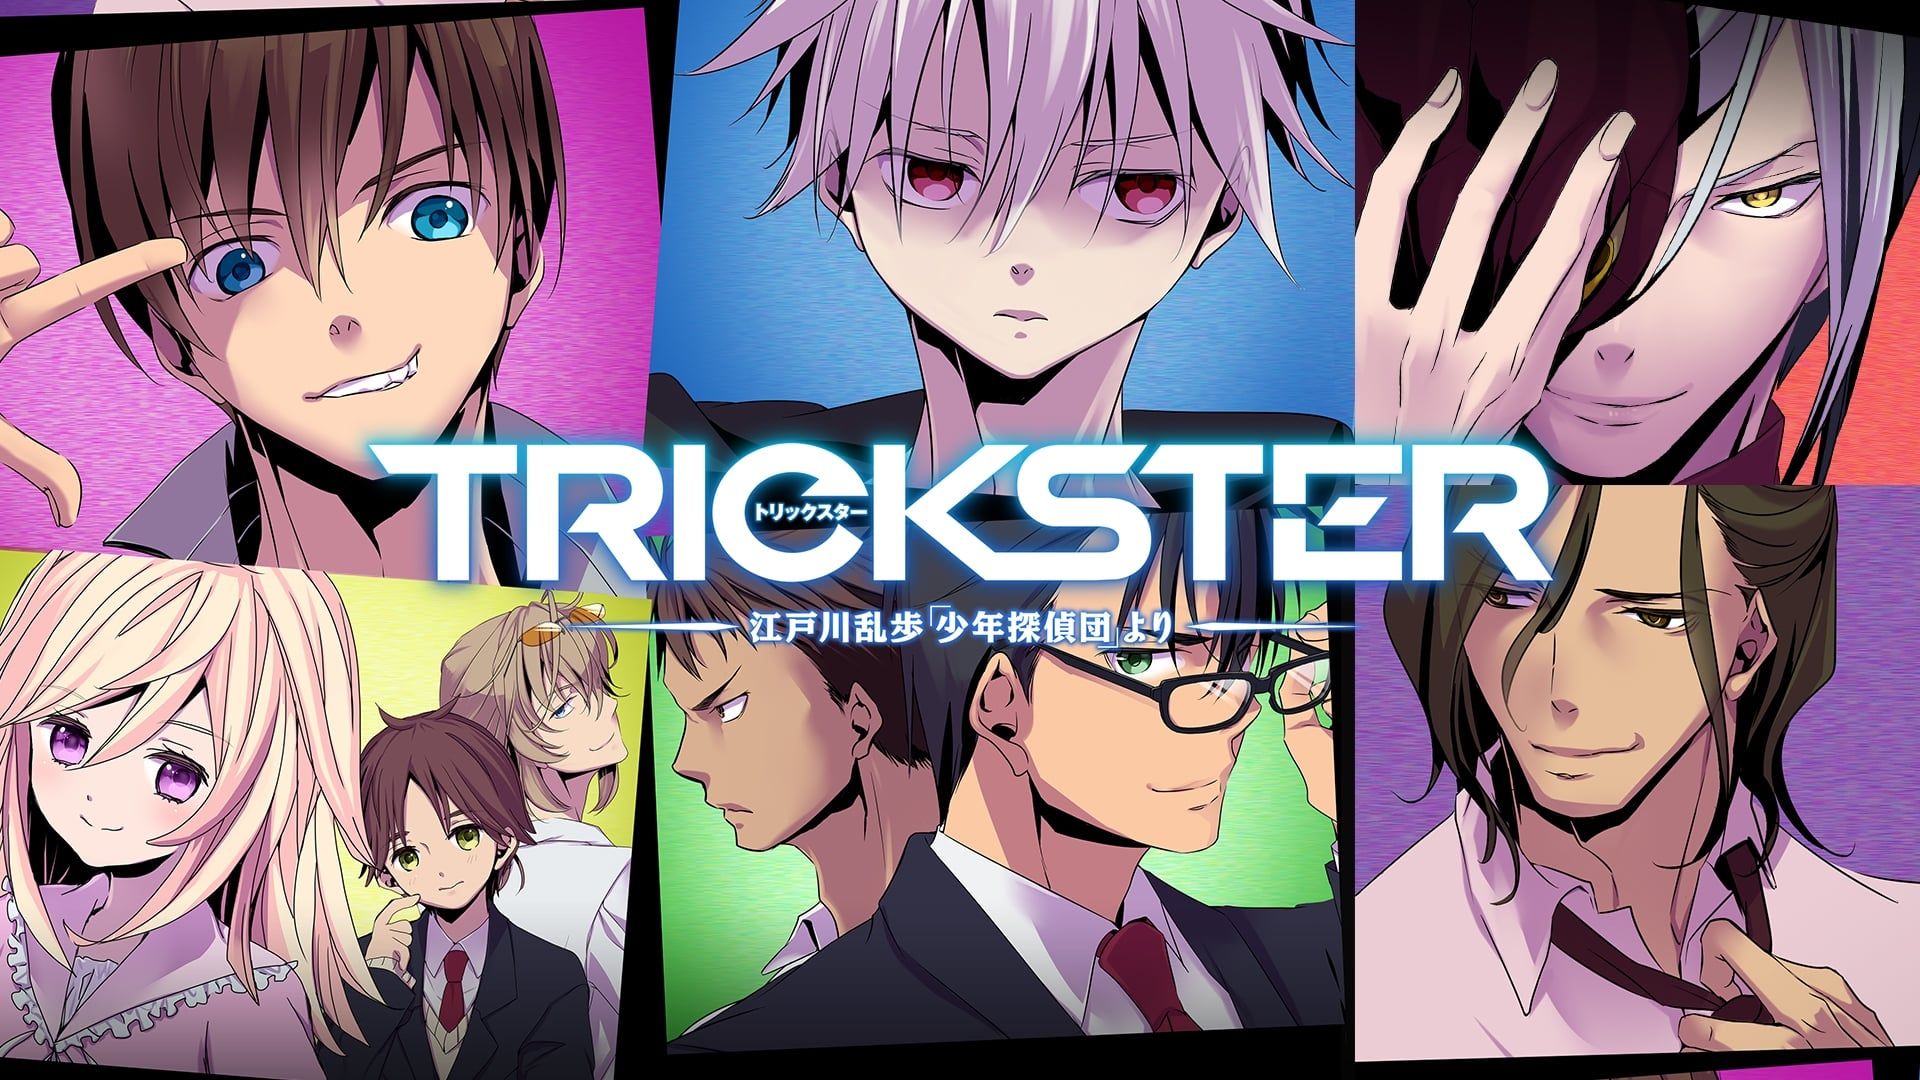 Trickster - Watch Episodes on Crunchyroll Premium, Funimation, Crunchyroll,  and Streaming Online | Reelgood